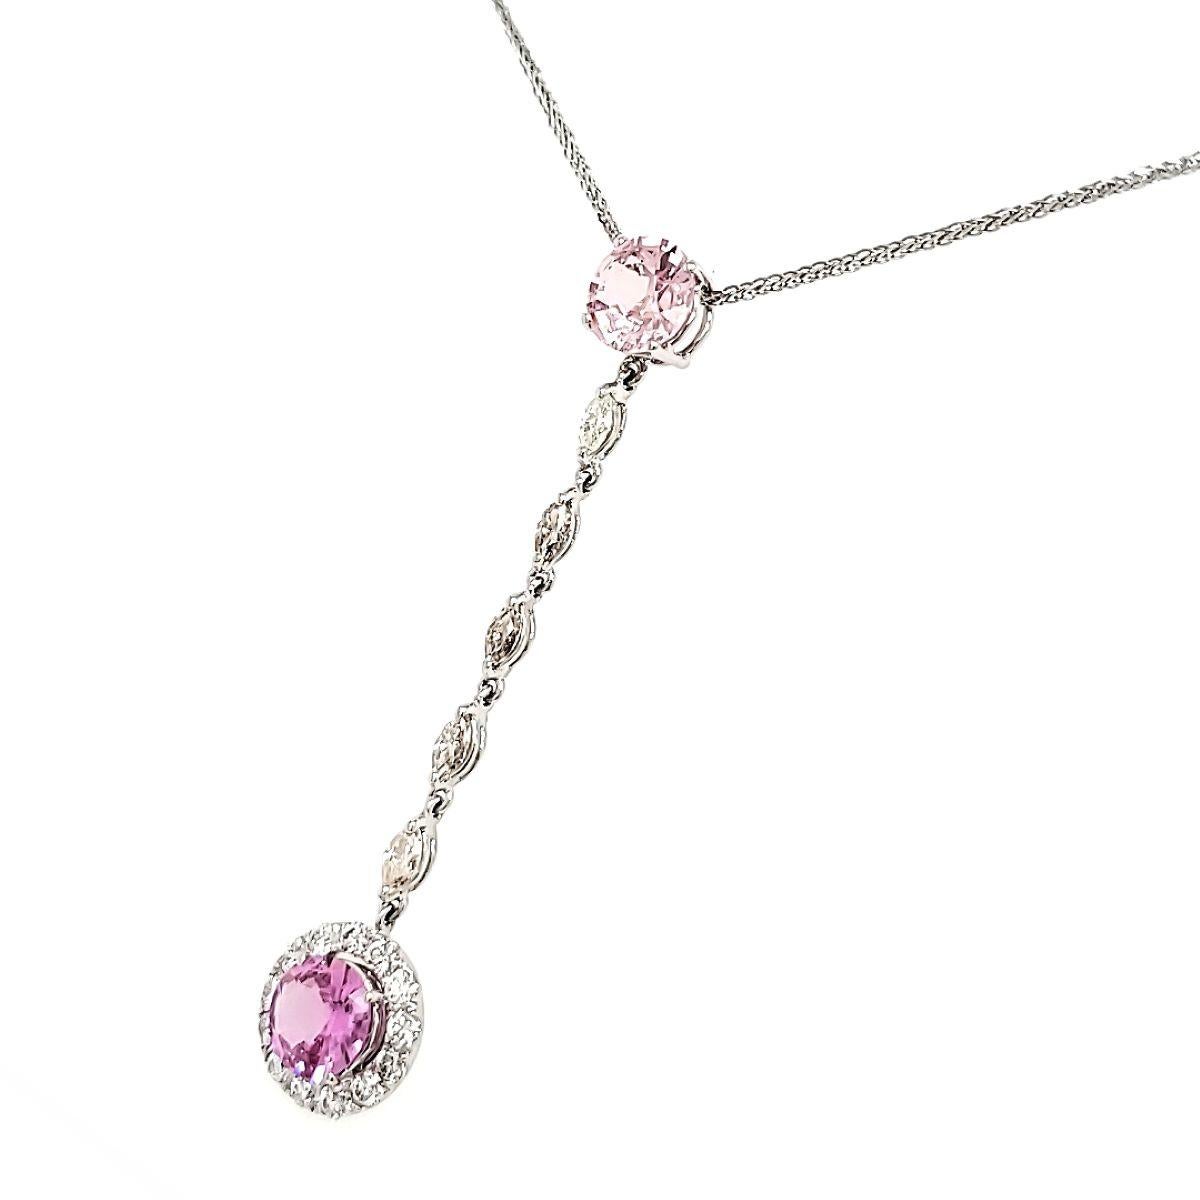 Pink Sapphire Cts 2.44 and Marquise Diamond Cts 0.42 Drop Pendant Necklace For Sale 1